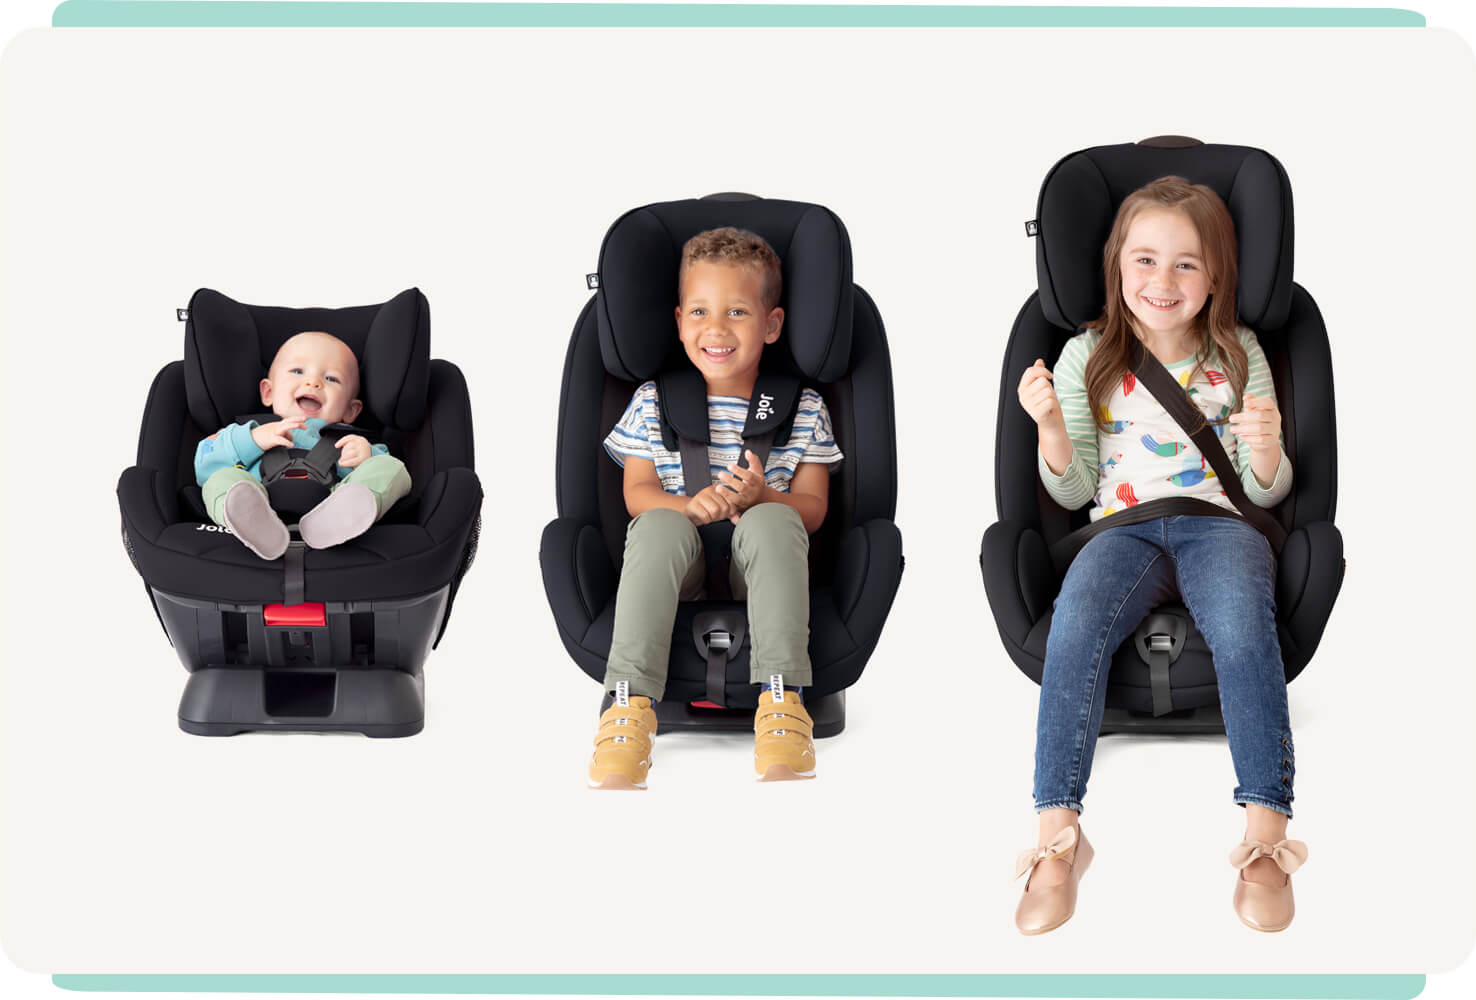 C:\Users\Ivo\Downloads\ma1-d-joie-carseats-stages-3-modes (1).jpeg